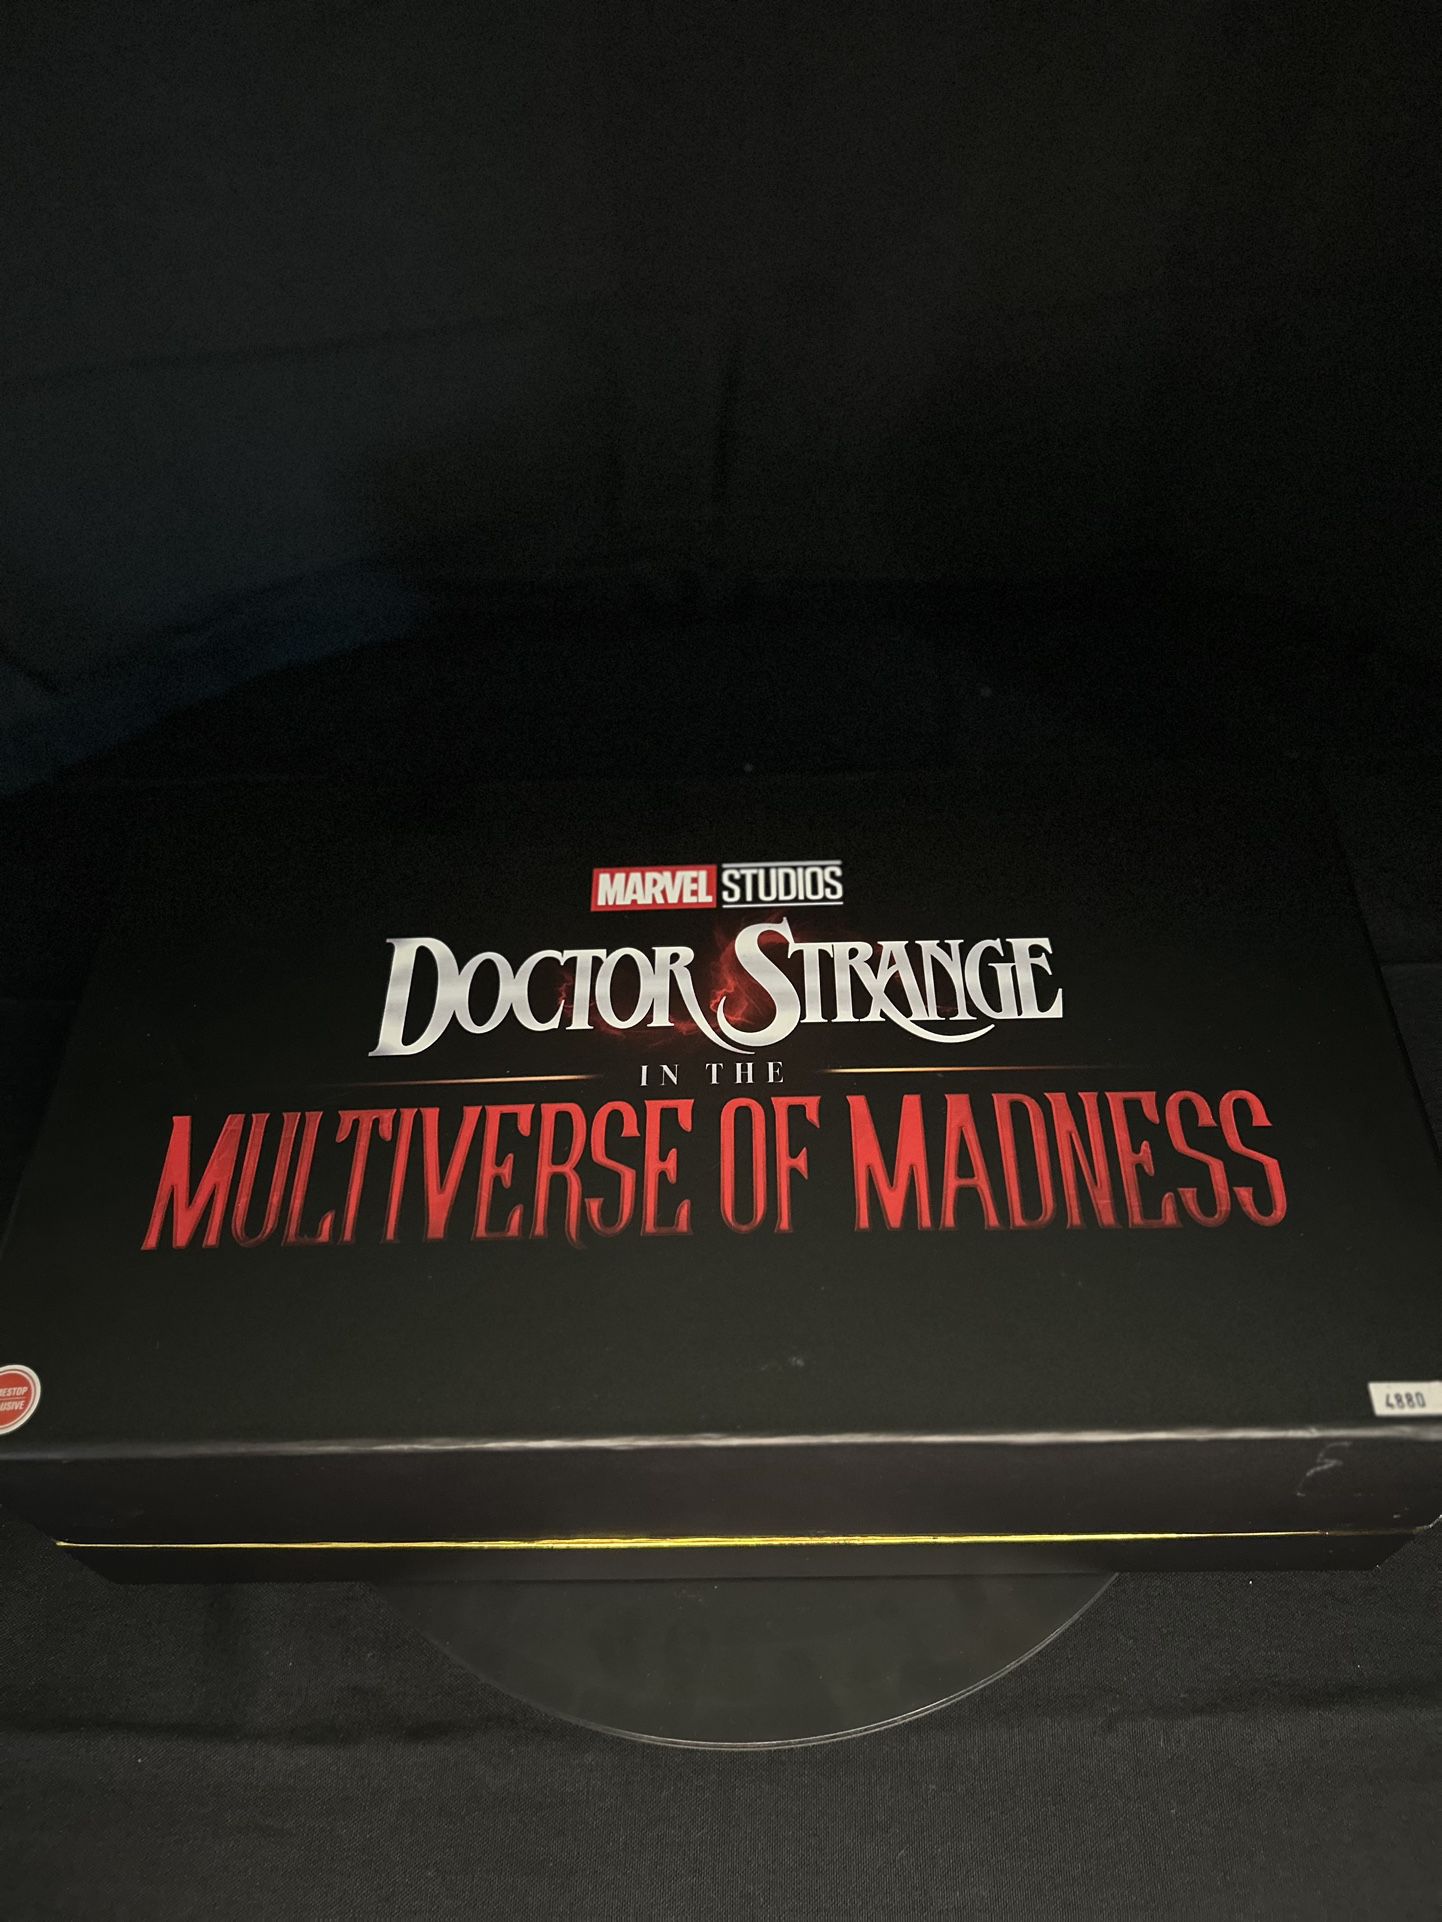 Marvel Studios GameStop Exclusive Doctor Strange In The Multiverse Of Madness Collectors Box Set